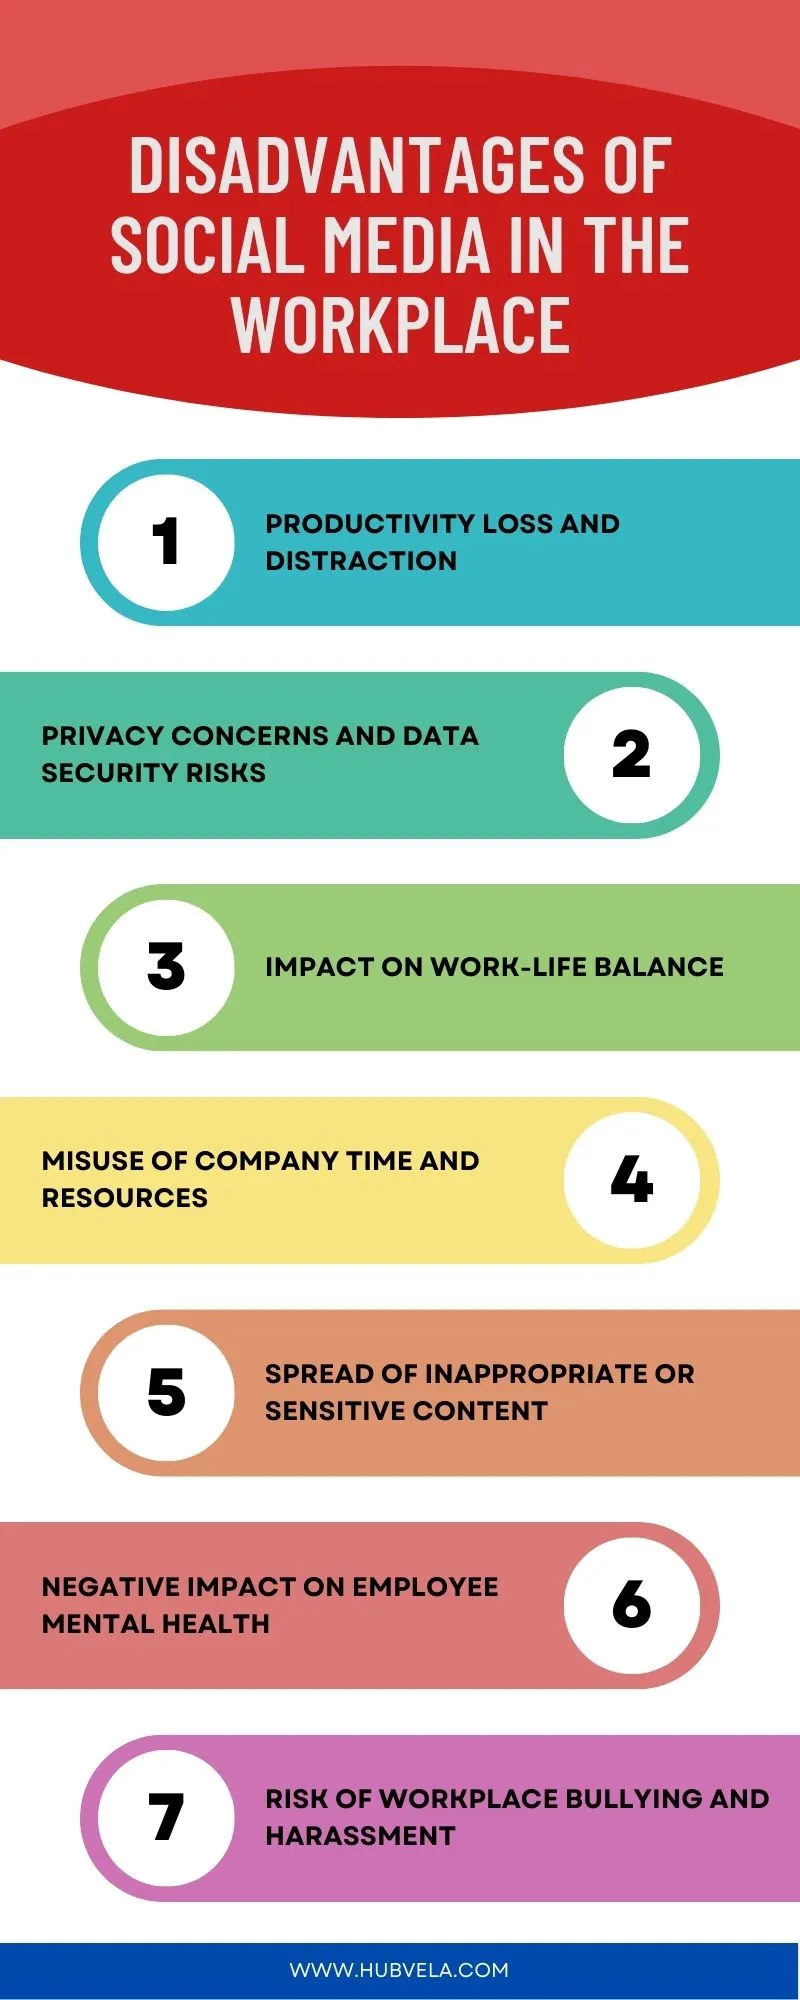 Disadvantages of Social Media in The Workplace infographic